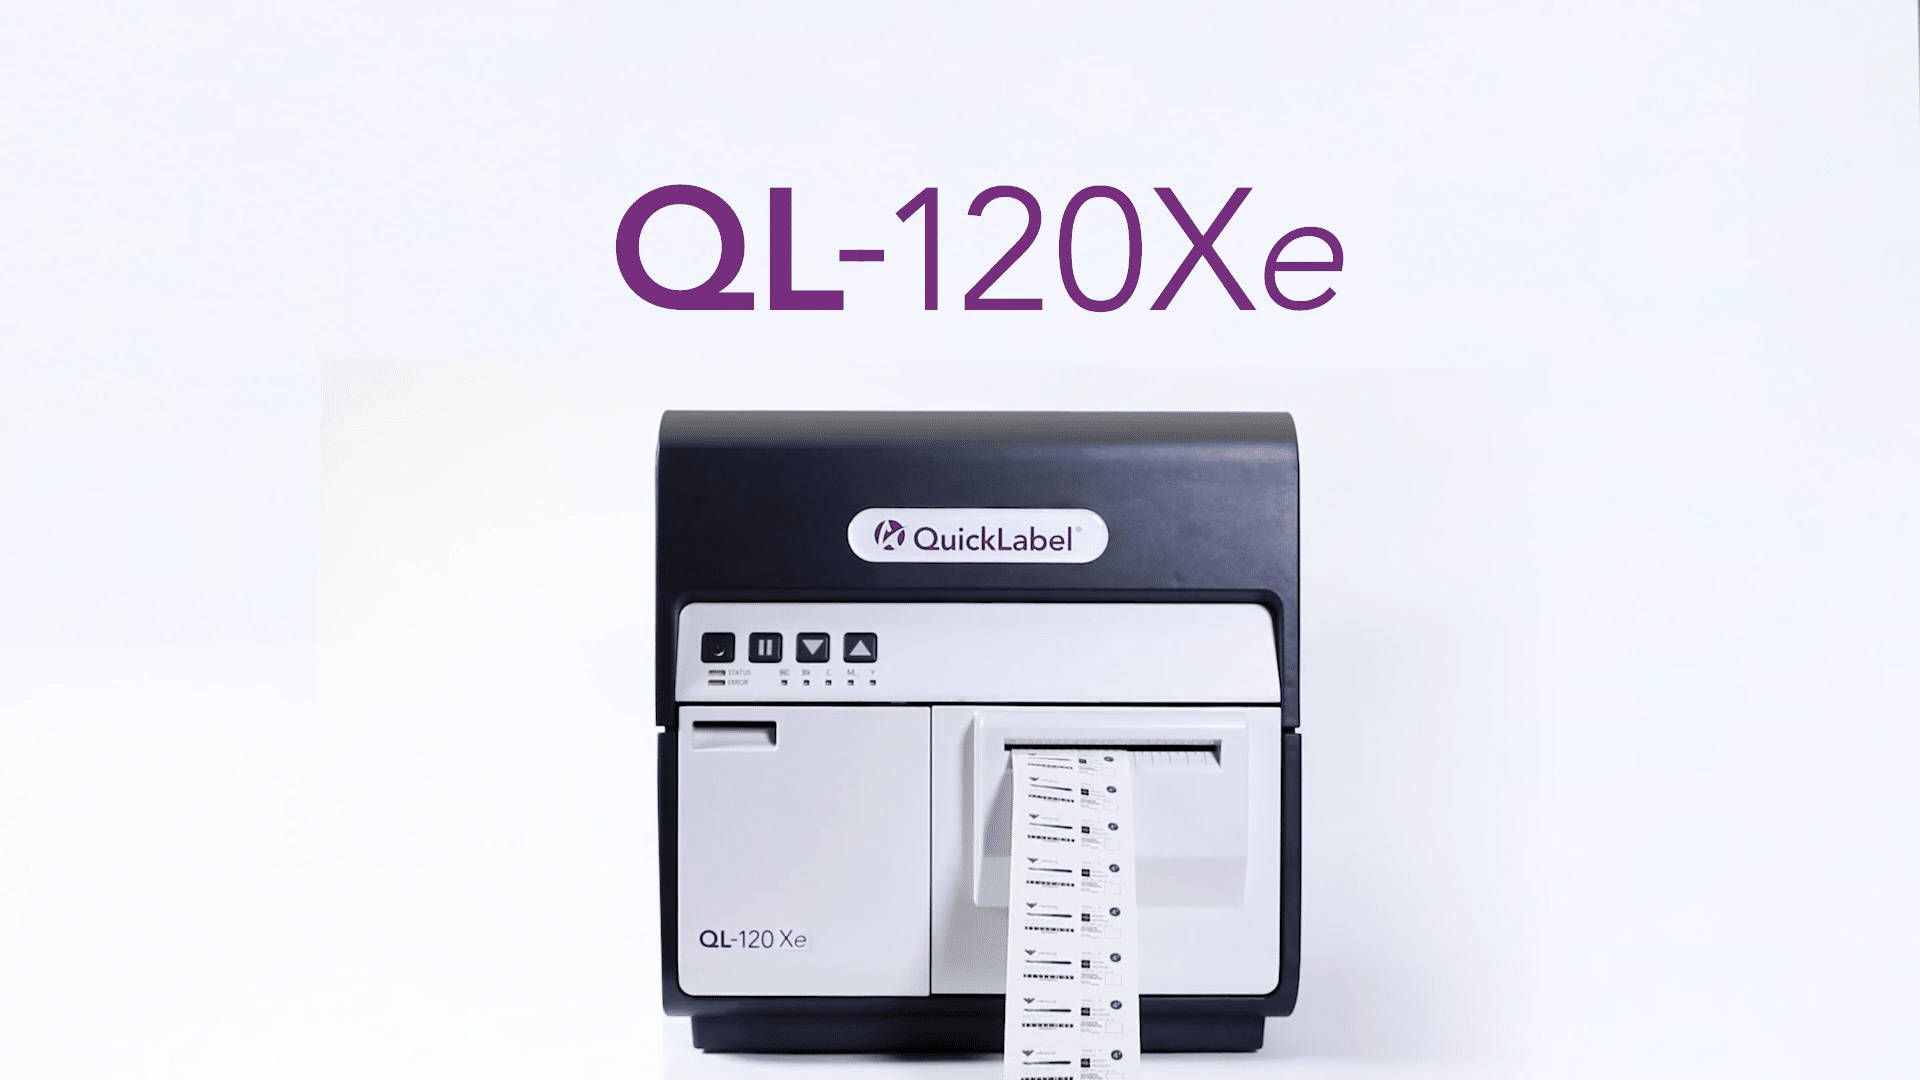 Introducing the QL-120Xe